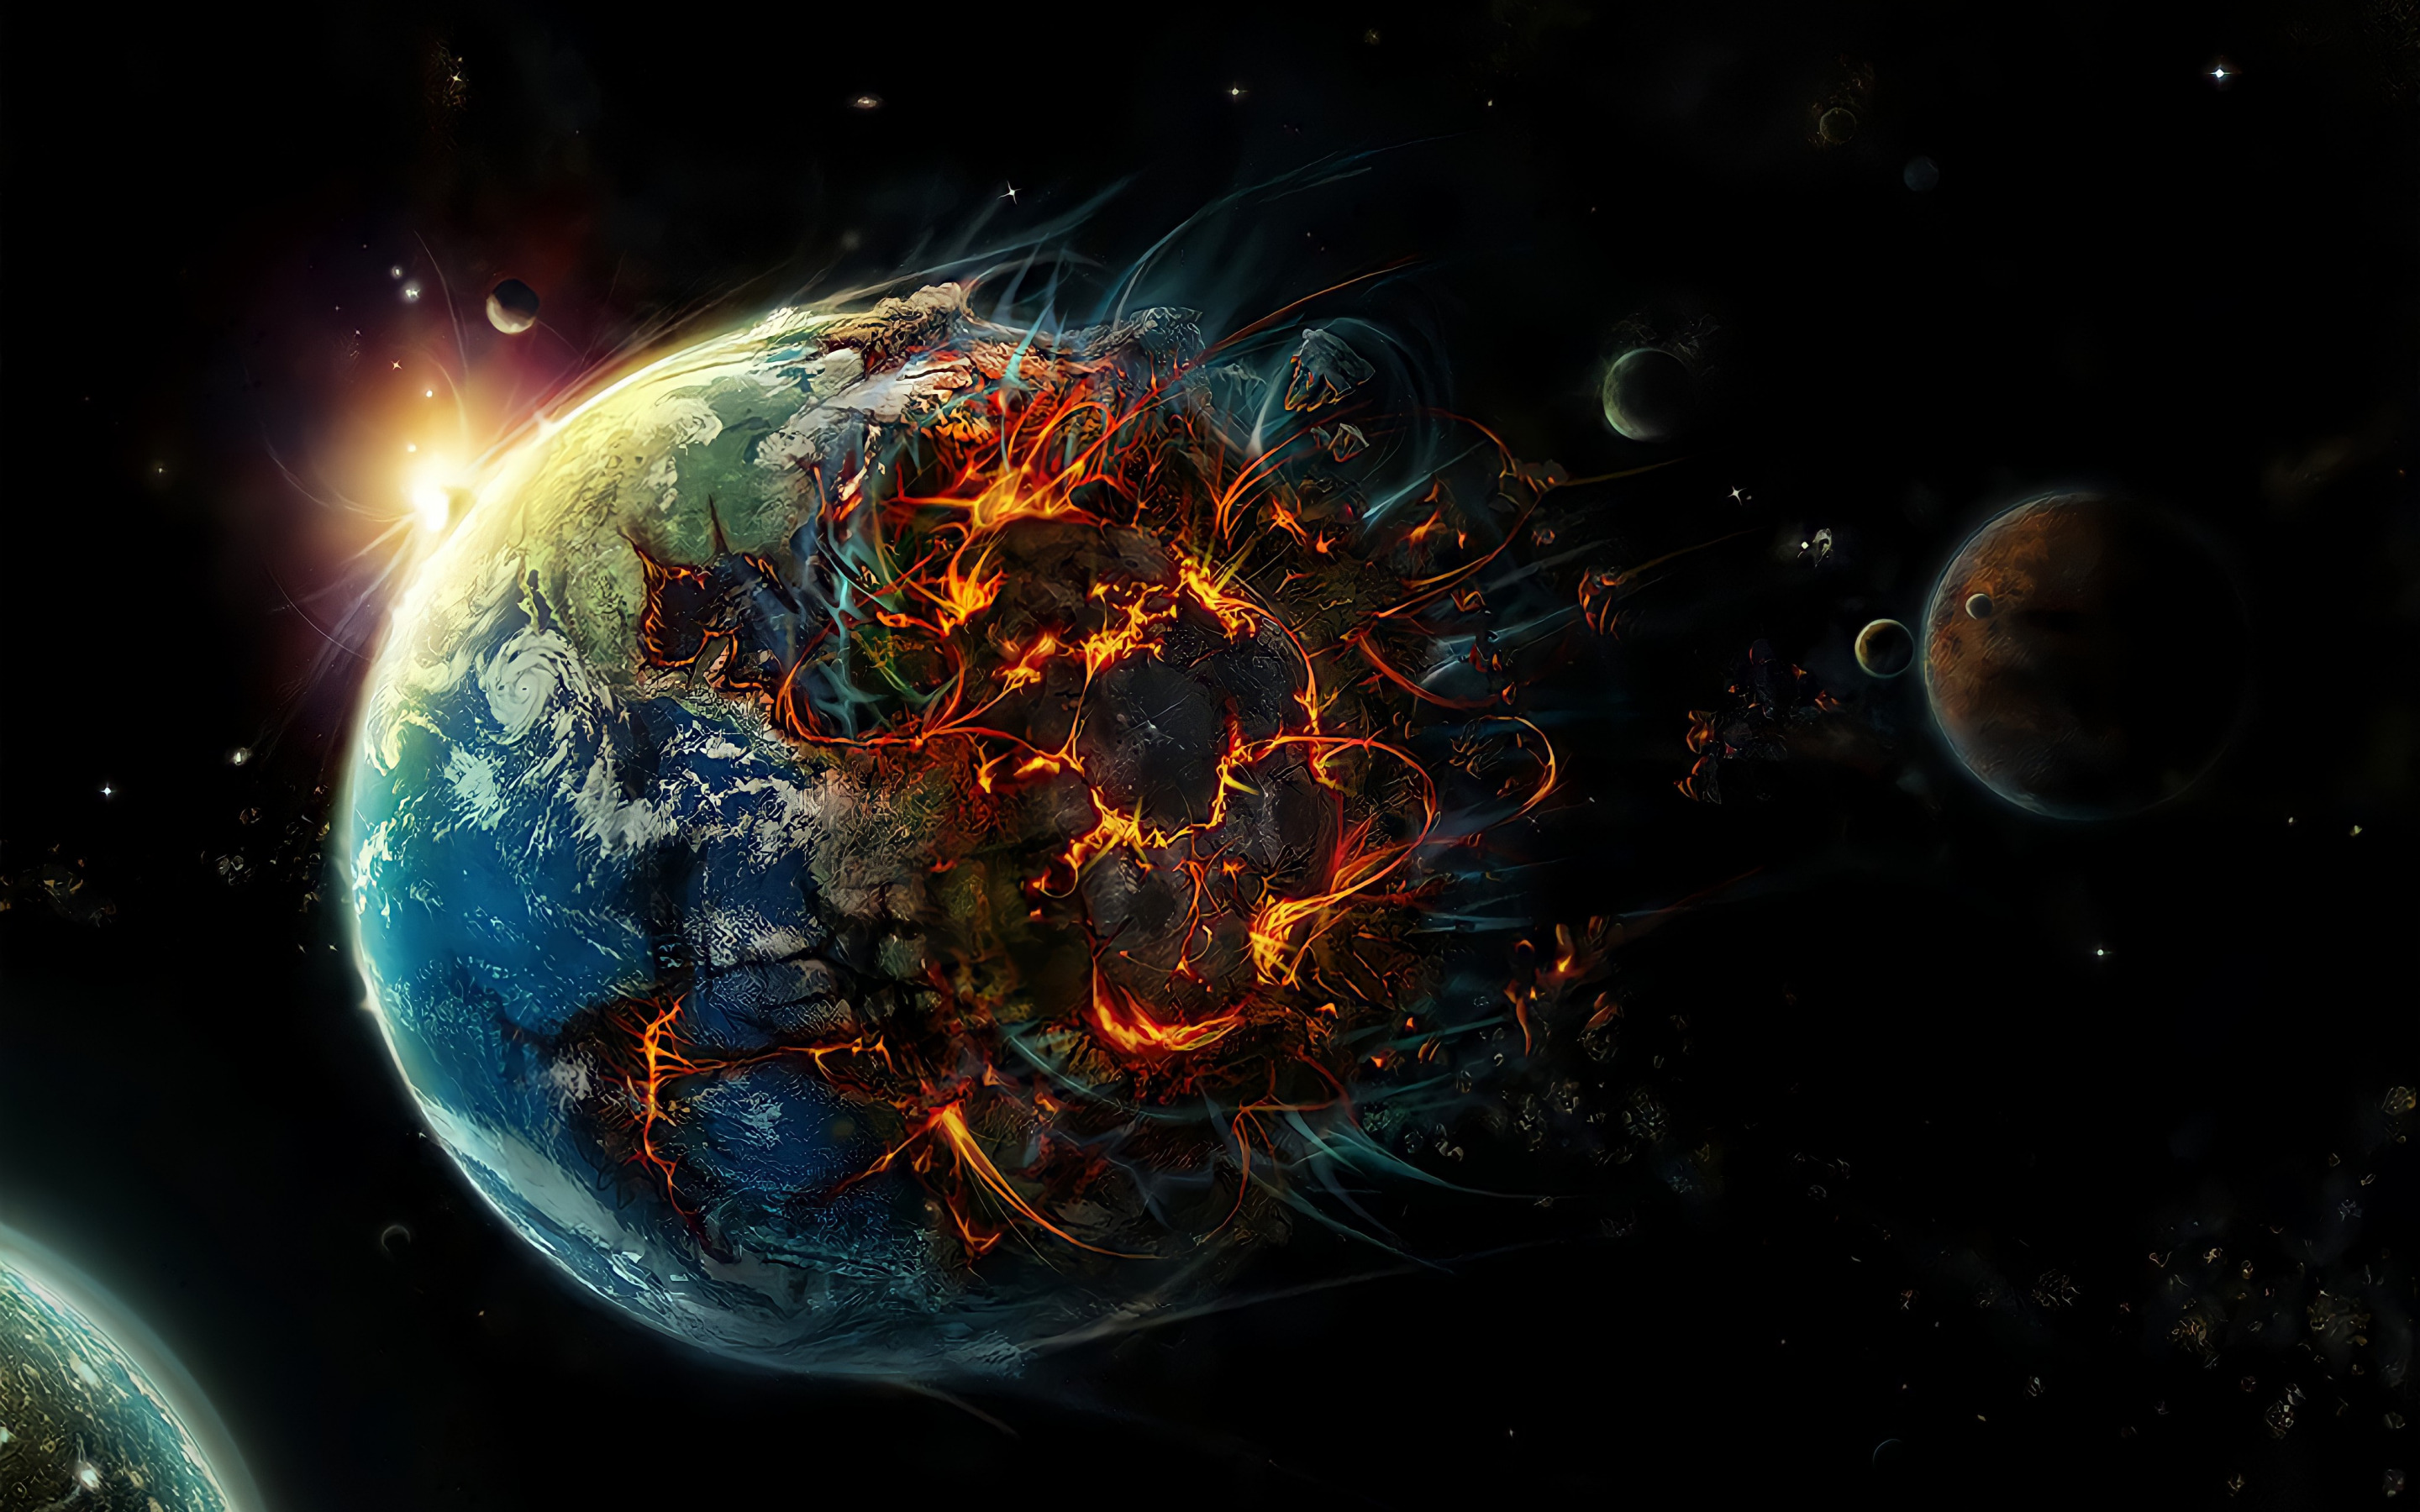 Download wallpaper apocalypse, destruction of the earth, art, earth explosion, earth destruction for desktop with resolution 2880x1800. High Quality HD picture wallpaper